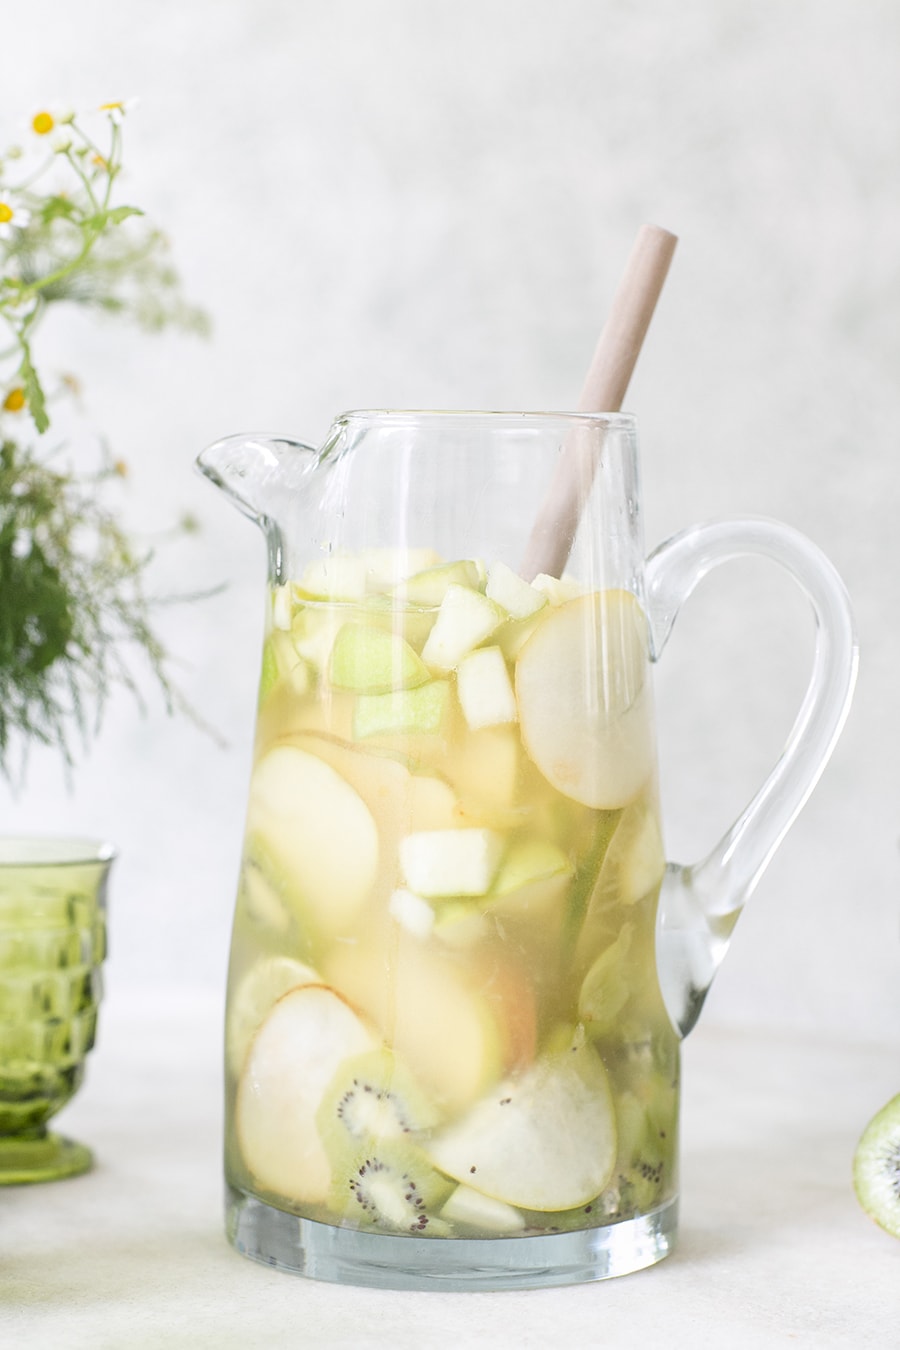 Whiskey Sangria in a clear pitcher, kiwis, apples, pears and grapes. 